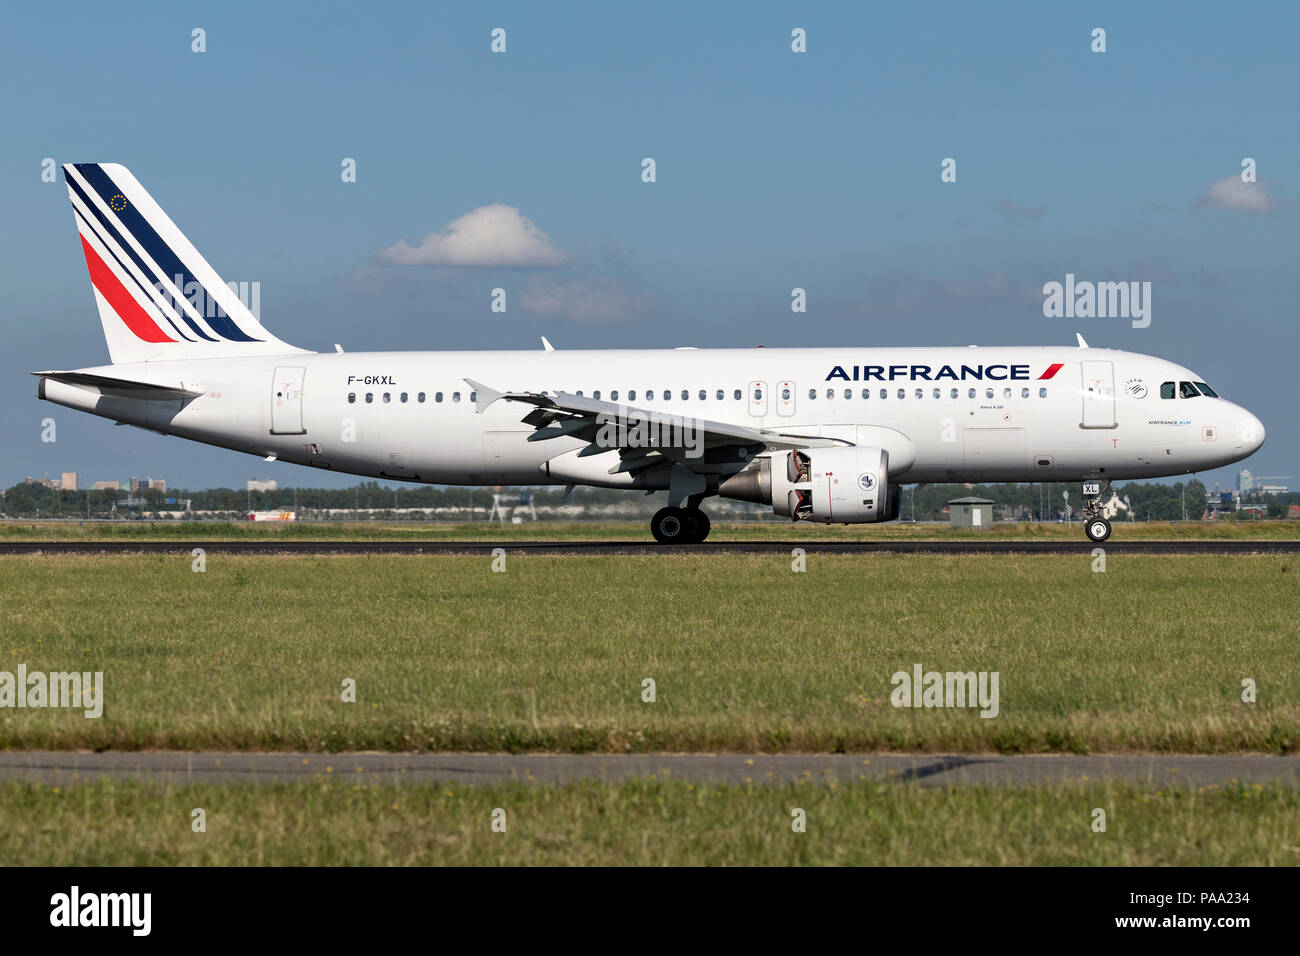 Air France A320-200 with registration F-GKXL just landed on runway 18R (Polderbaan) of Amsterdam Airport Schiphol. Stock Photo